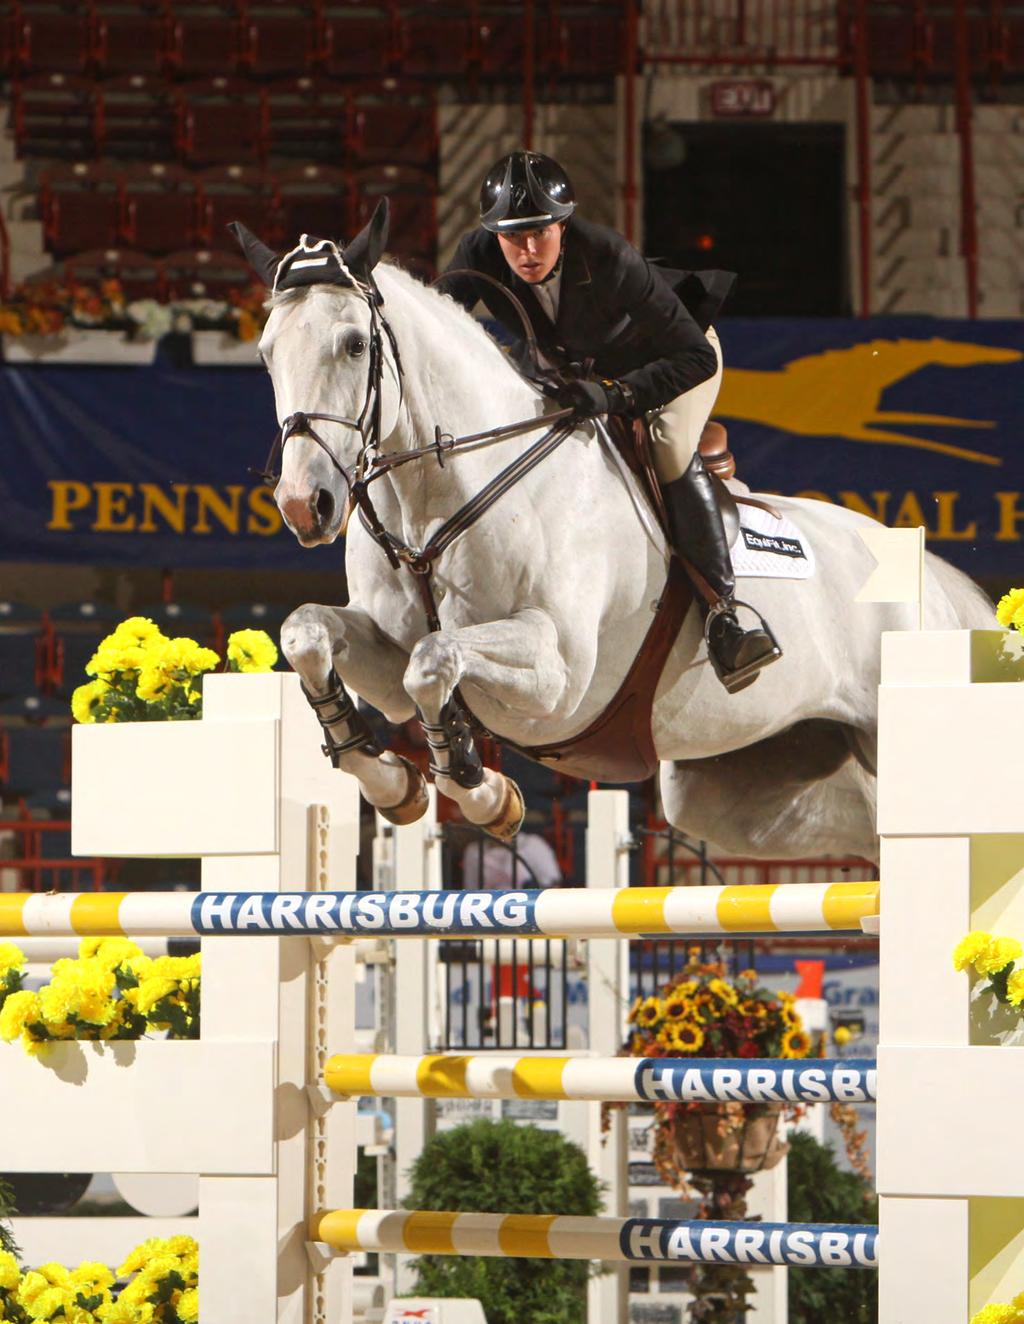 Destination Harrisburg As one of the nation s oldest and most revered horse shows, the 73